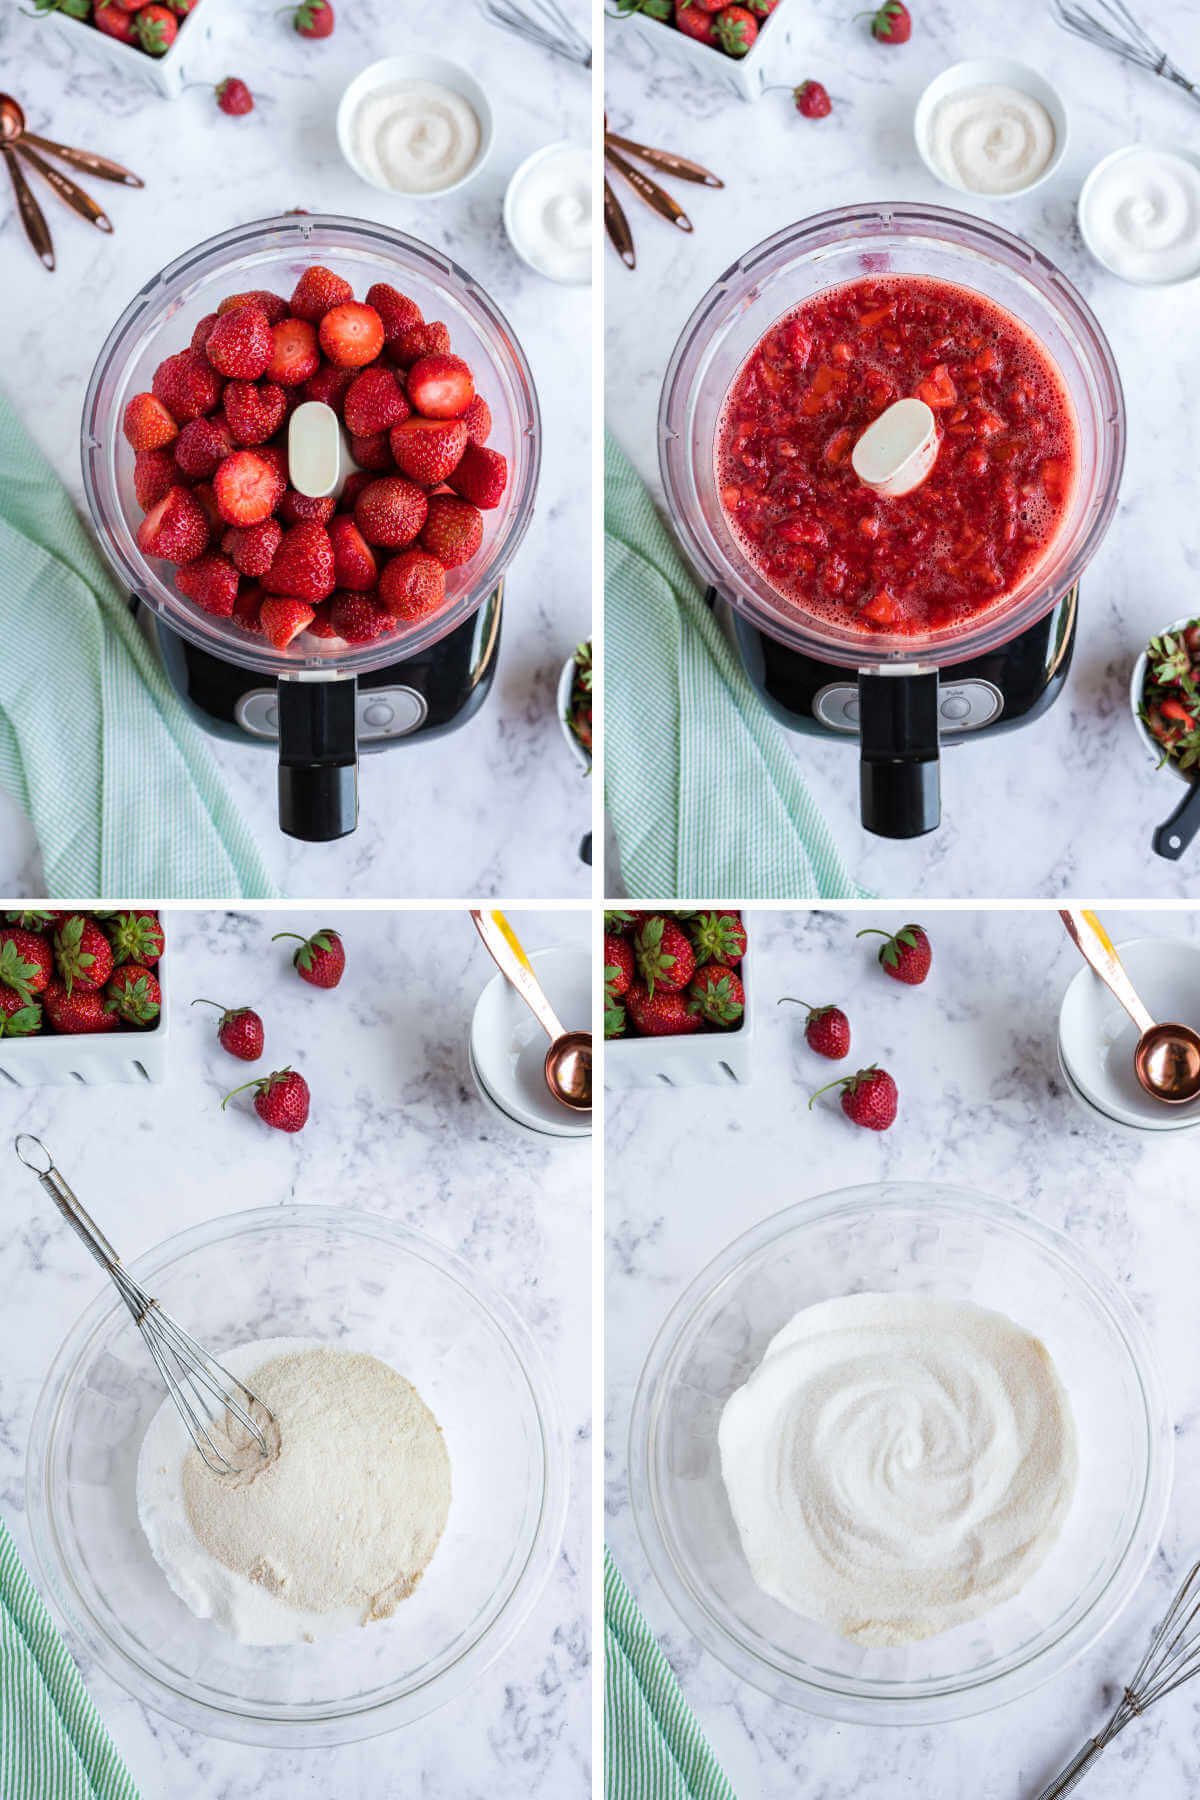 chopping strawberries for strawberry jam in a food processor.